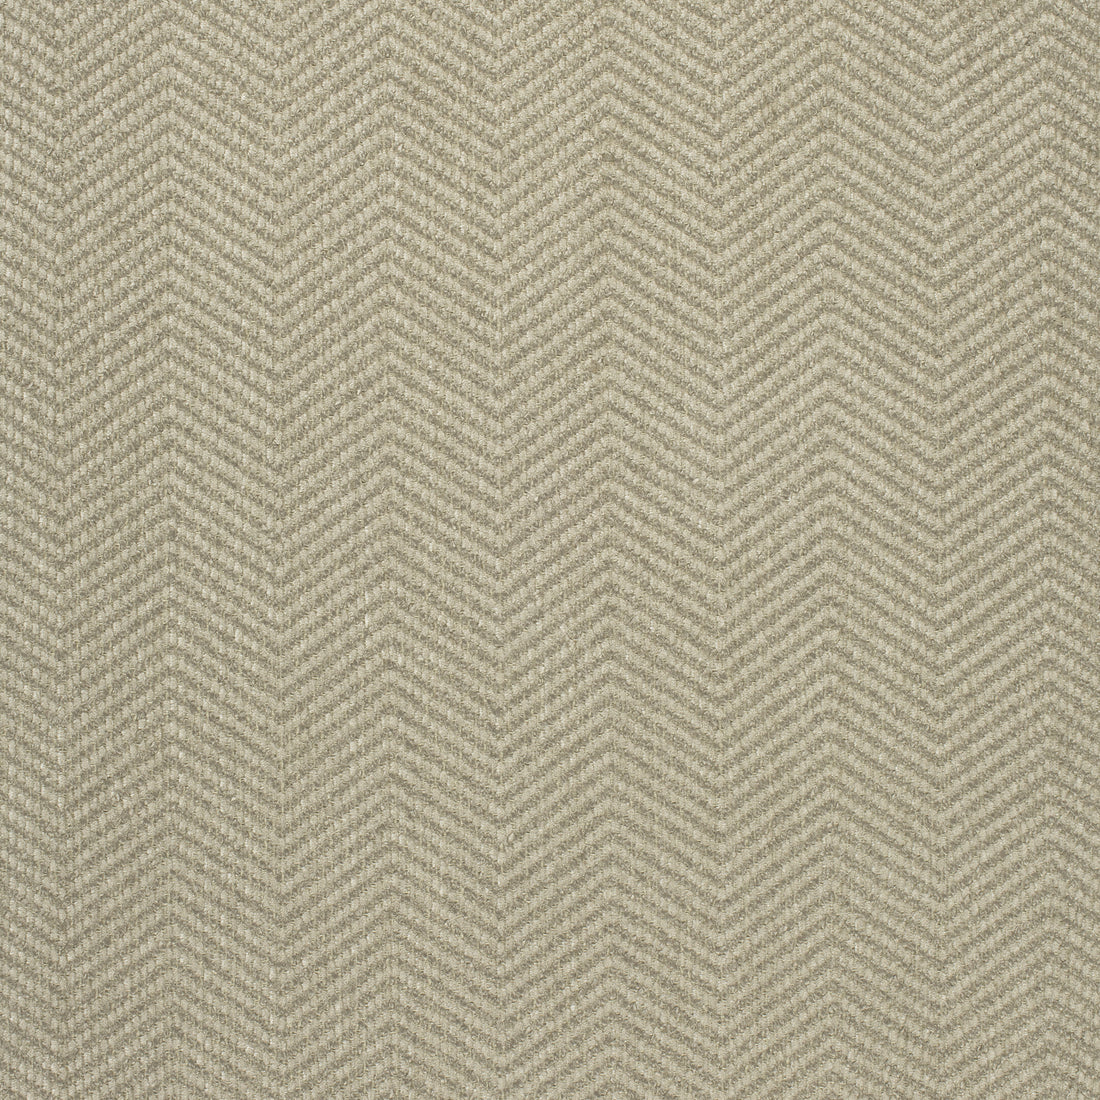 Dalton Herringbone fabric in khaki color - pattern number W80624 - by Thibaut in the Pinnacle collection